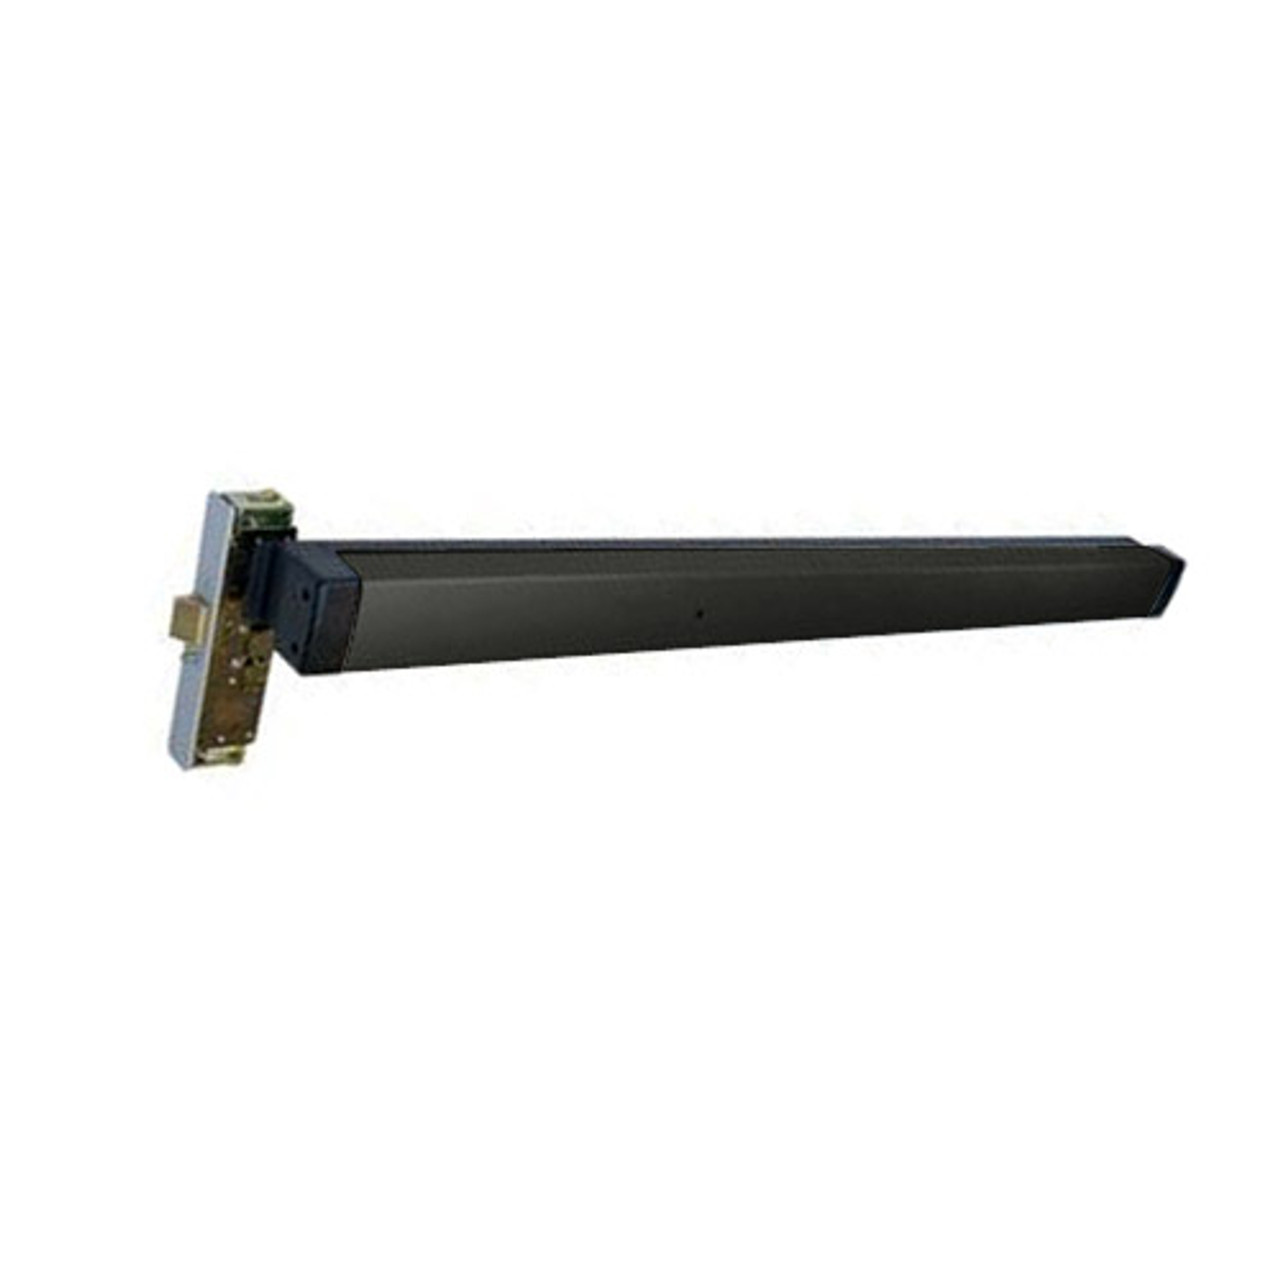 3330-M2-83-48-335 Adams Rite Mortise Exit Device